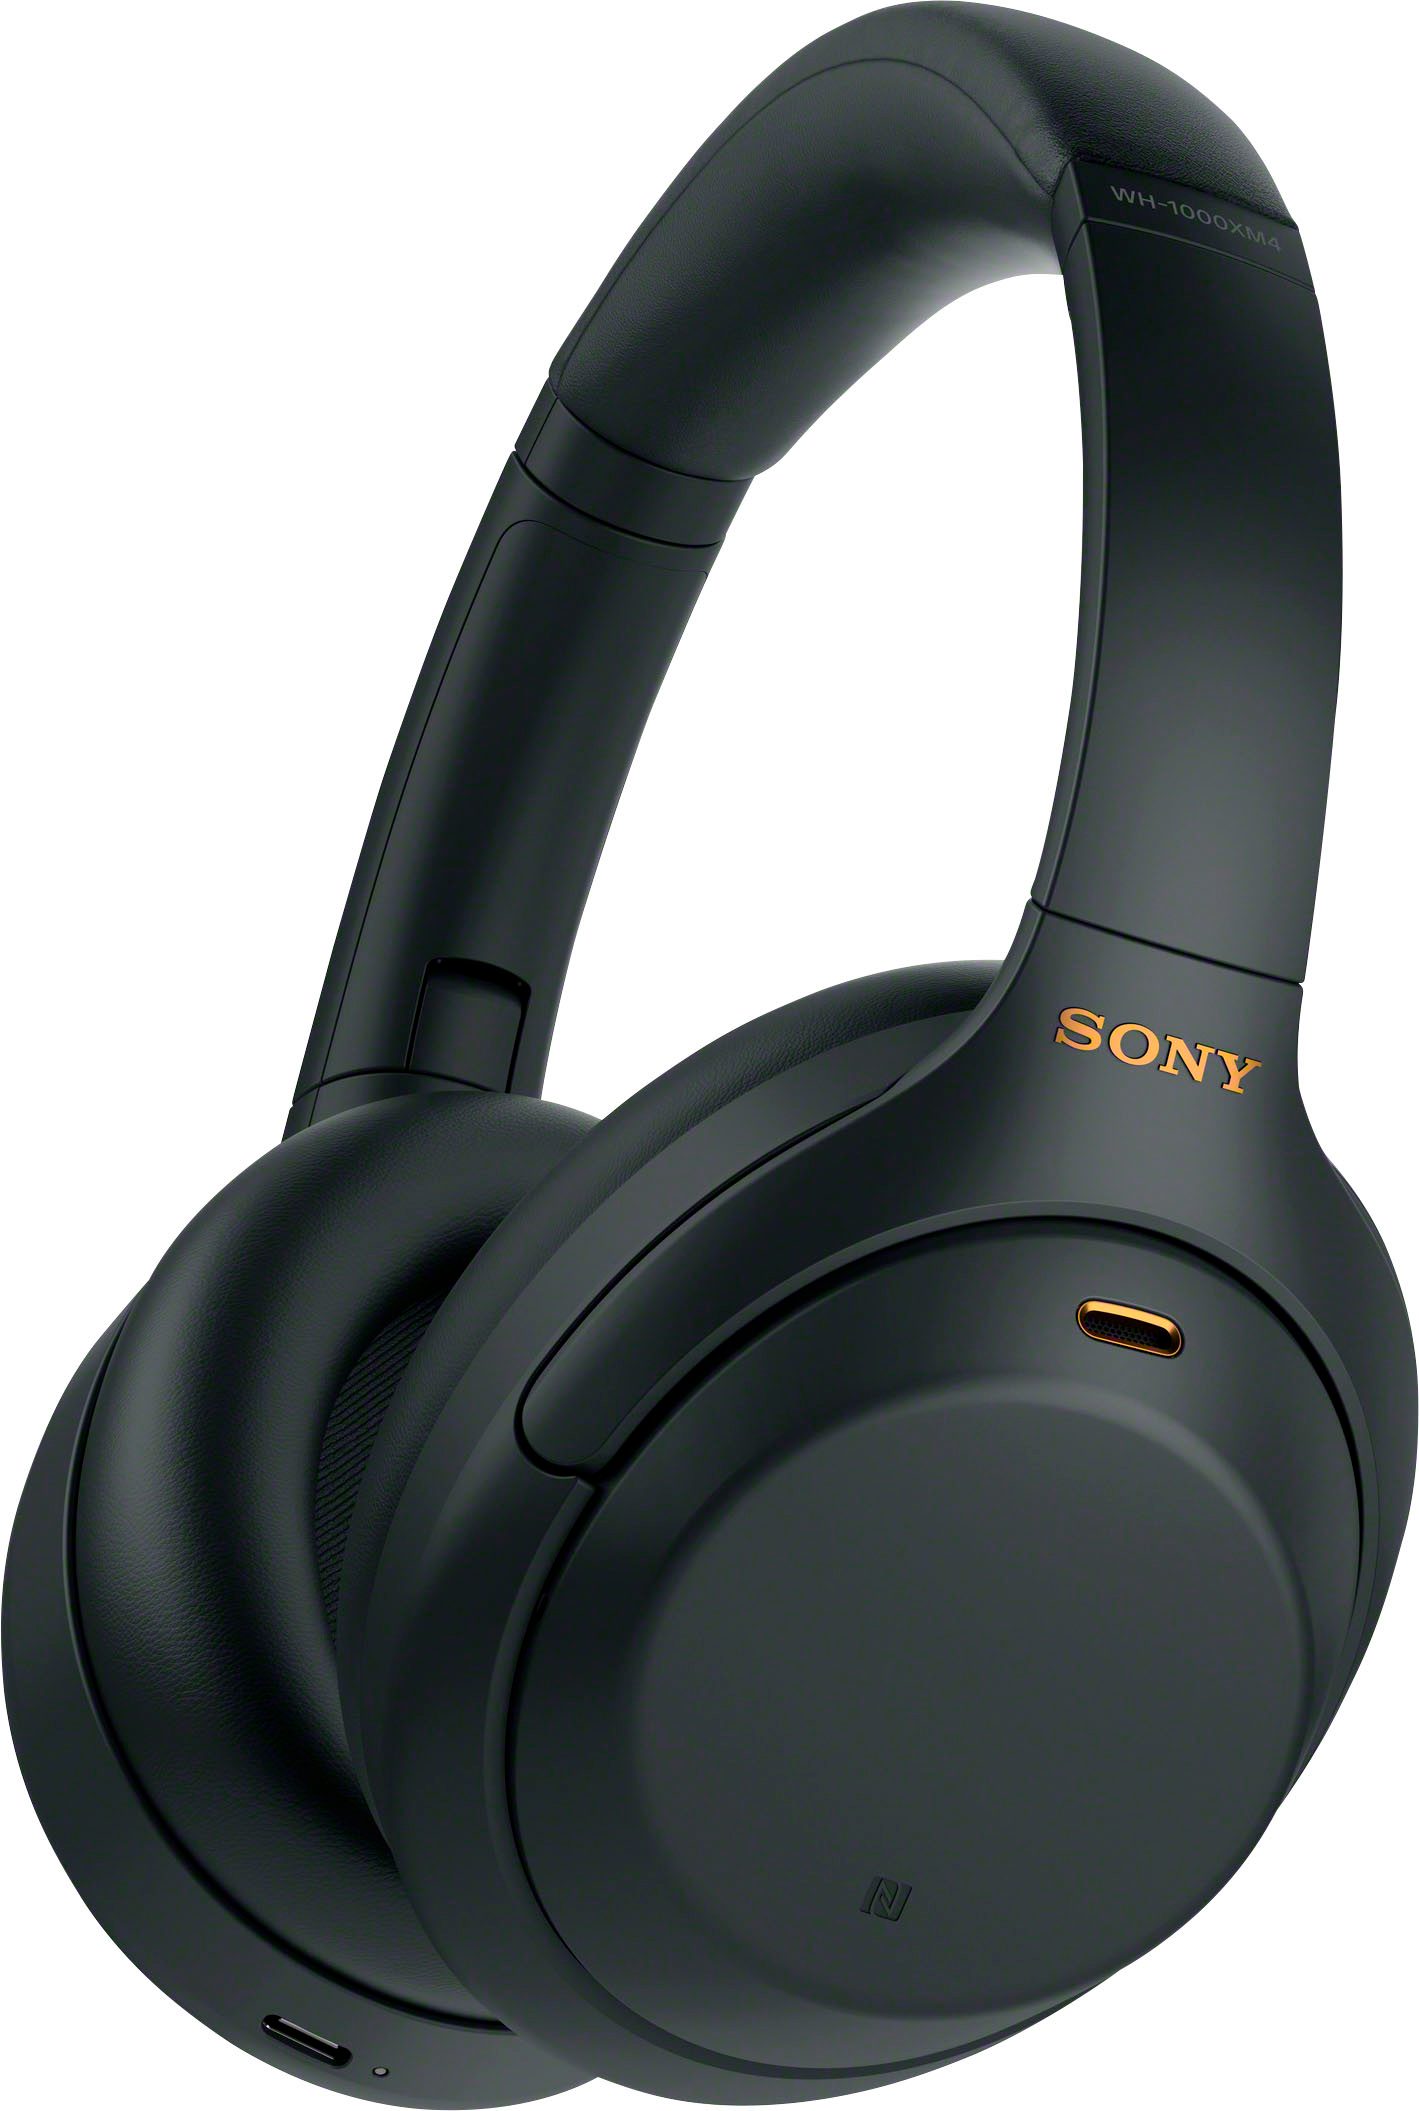 Sony WH-1000XM4 Wireless Noise-Cancelling Over-the-Ear